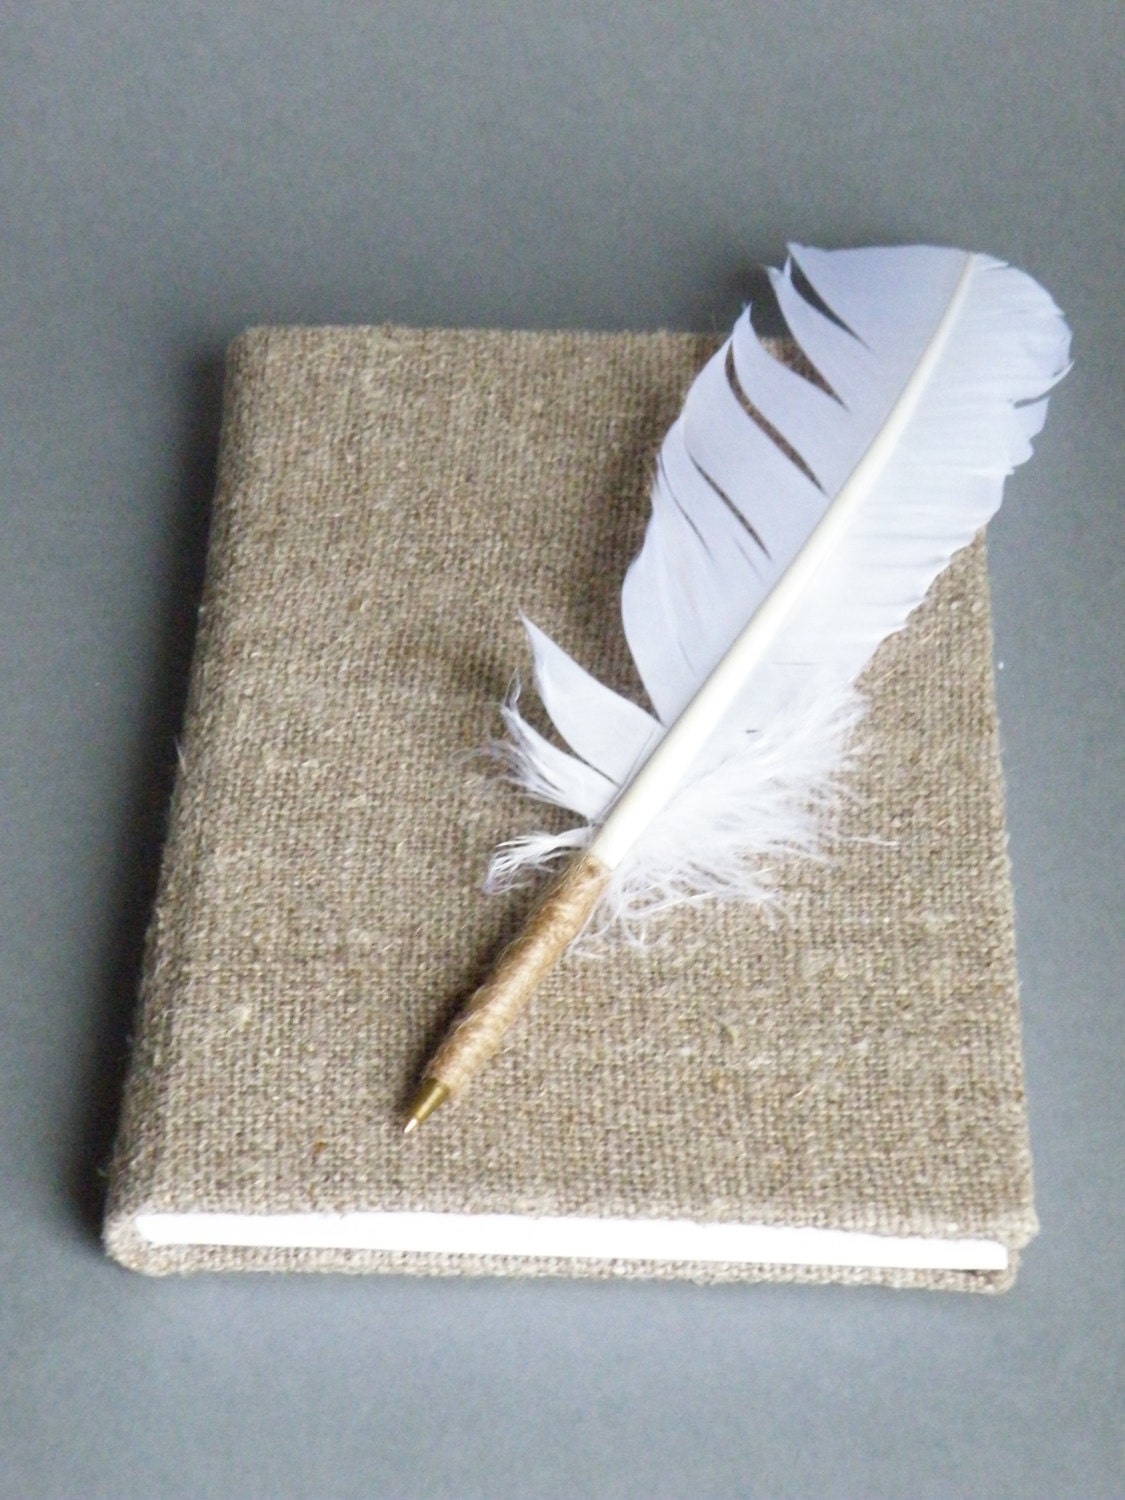 How to Make a Feather Pen - The Happy Housewife™ :: Home Management